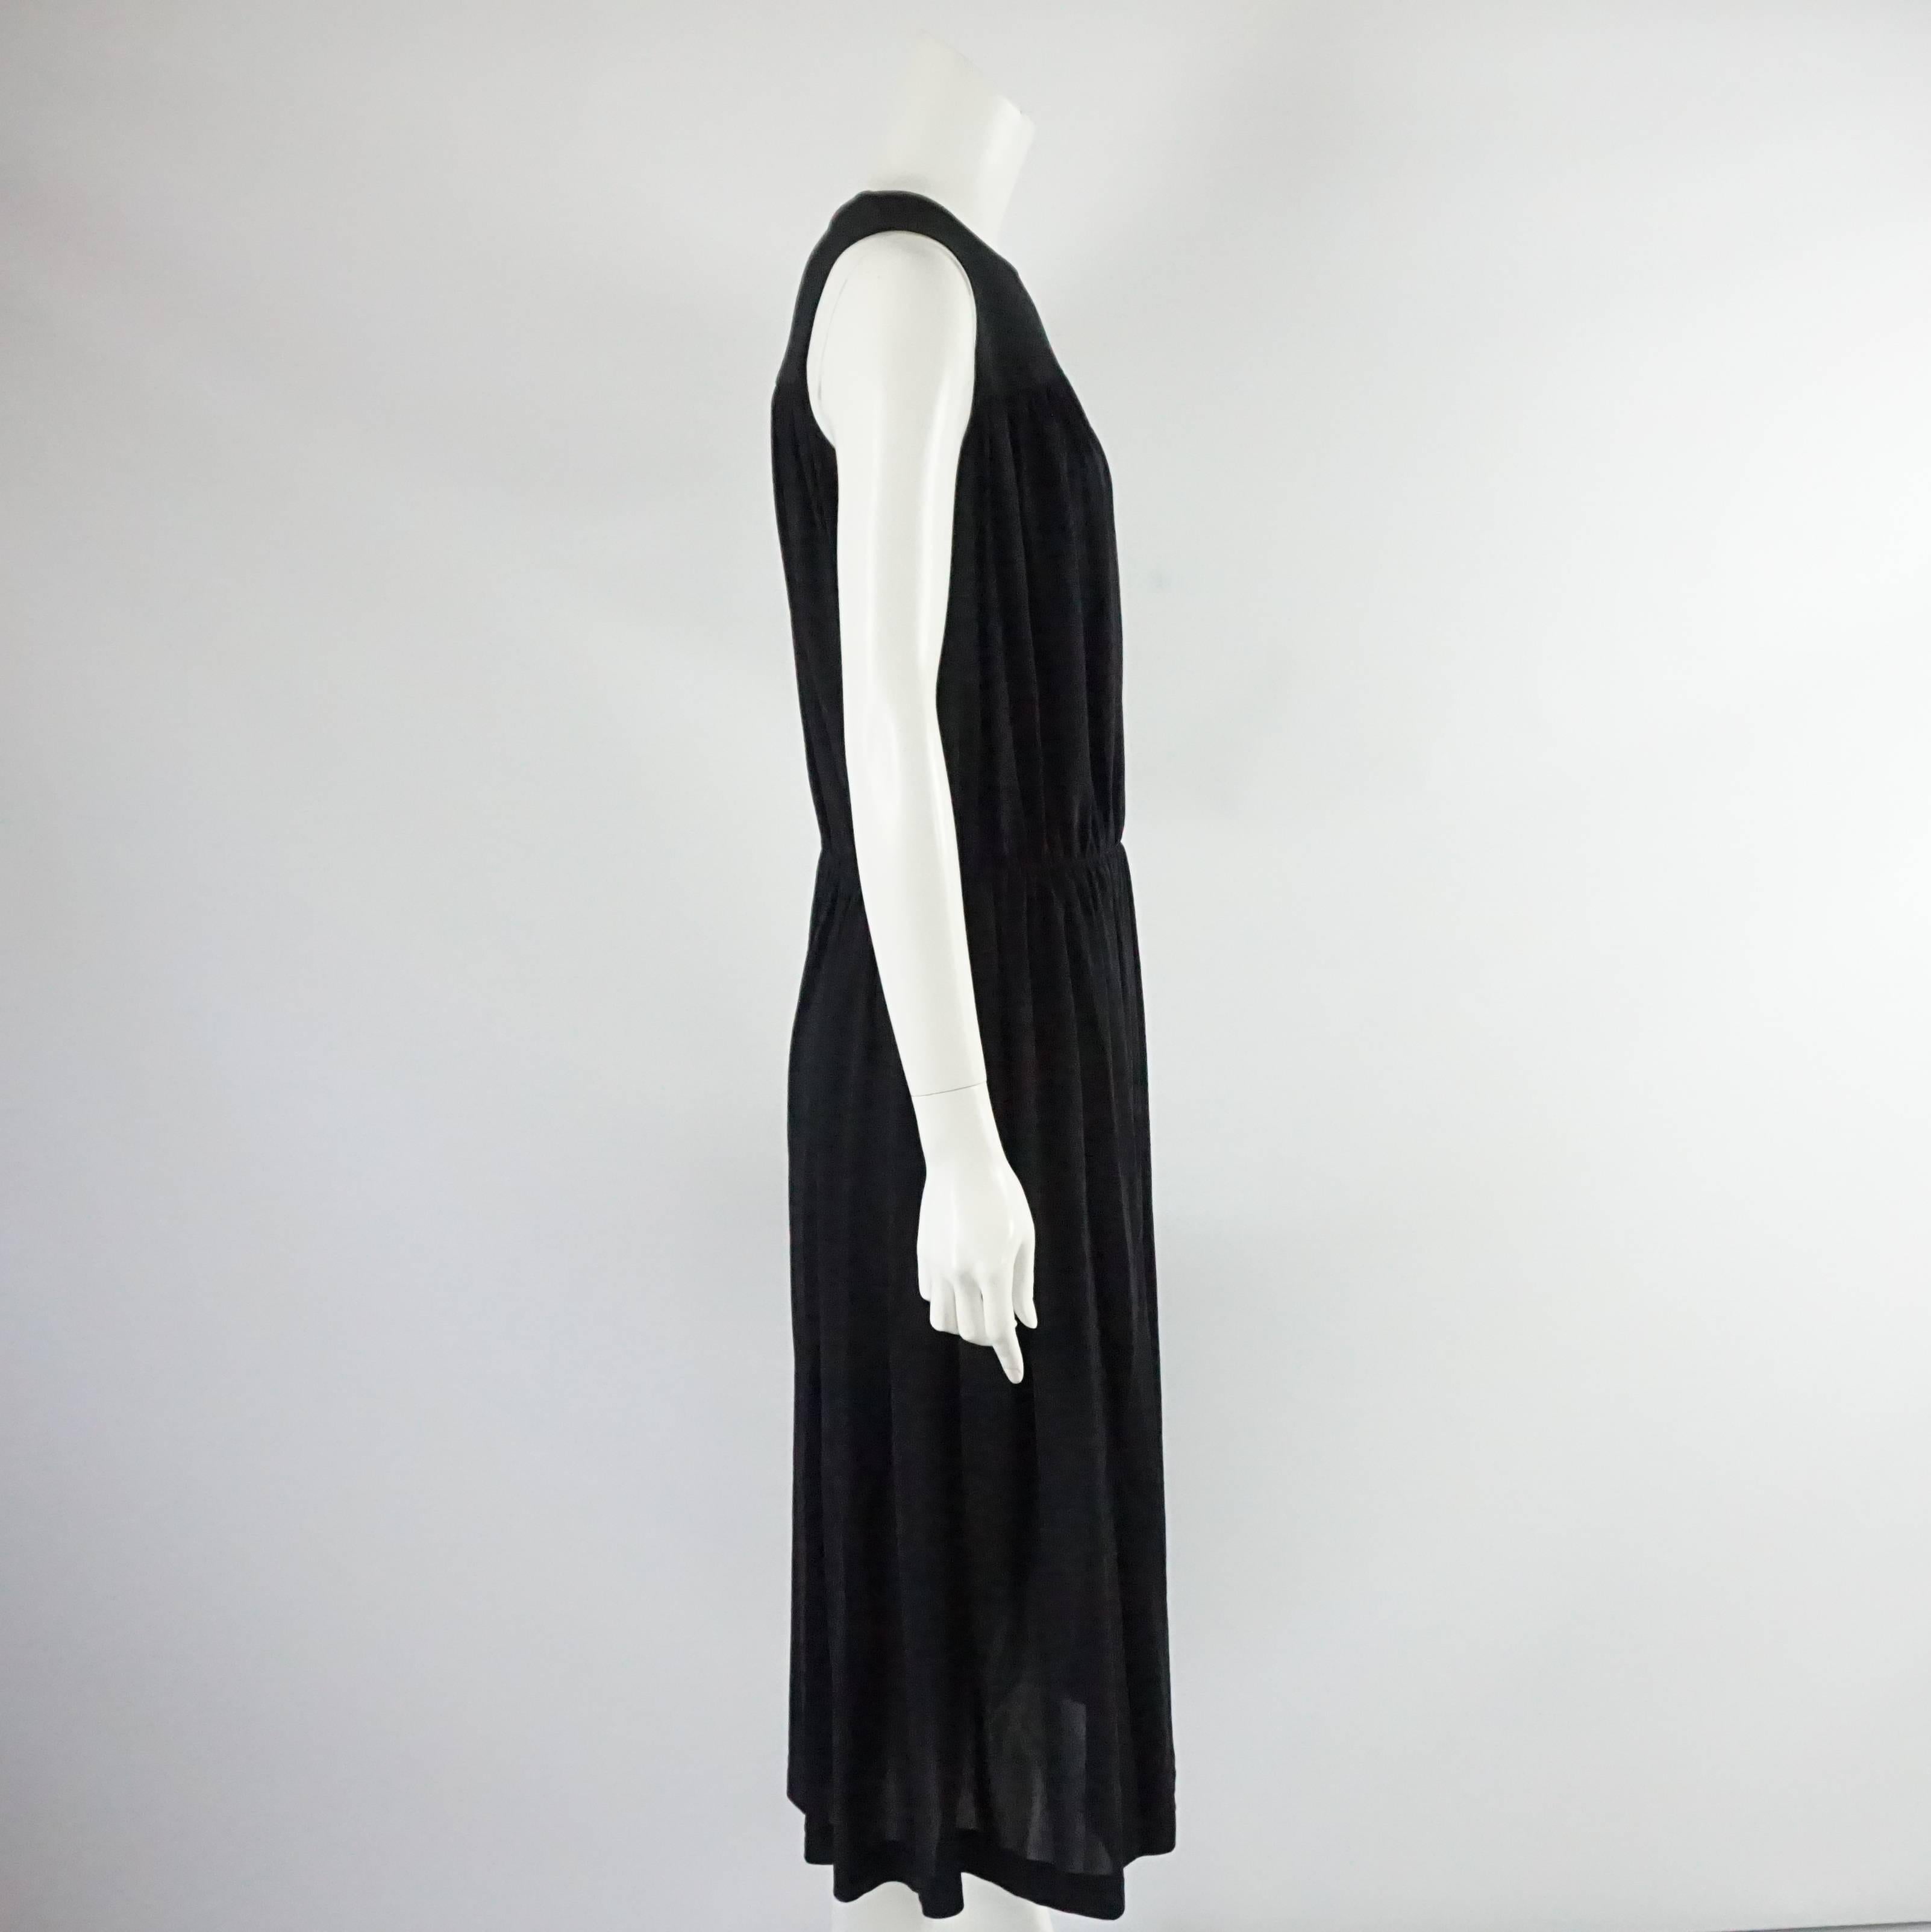 This Comme de Garcons sleeveless dress is made of black silk. It has a pleated top and bottom and is cinched at the waist. This dress is in very good condition with some minor imperfections (see last 3 pictures).

Measurements
Bust: 33